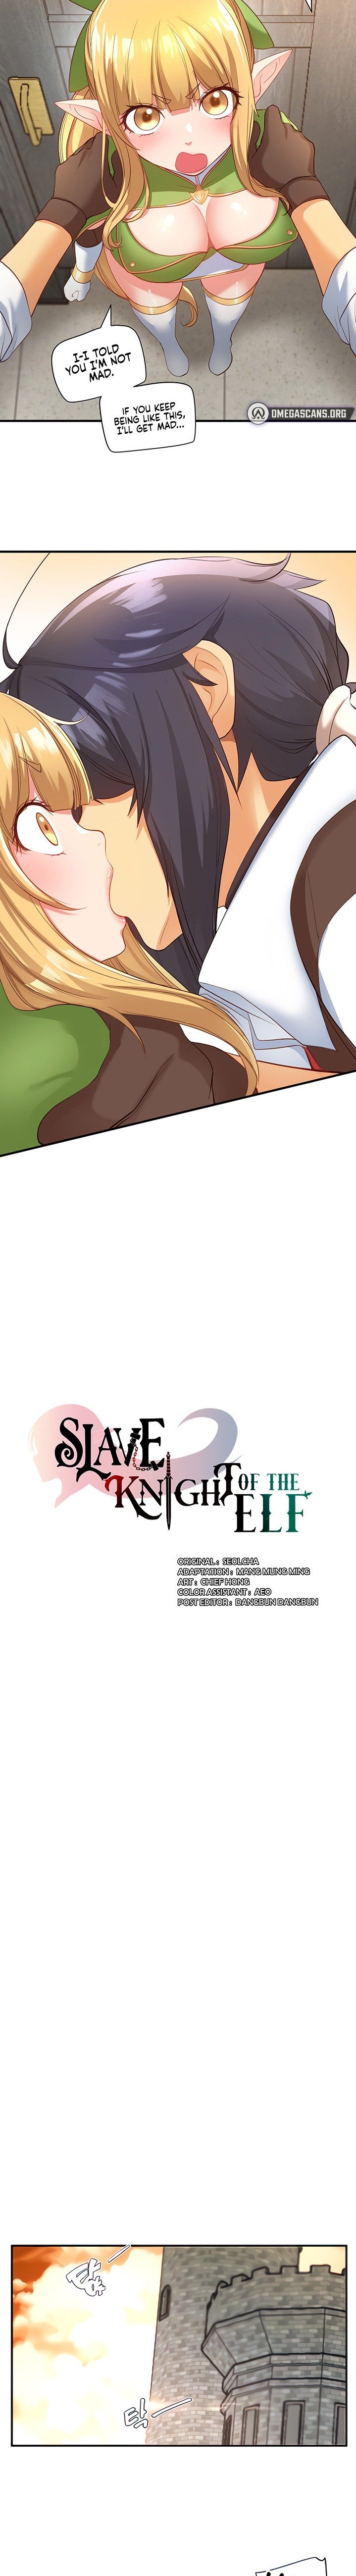 slave-knight-of-the-elf-chap-30-1